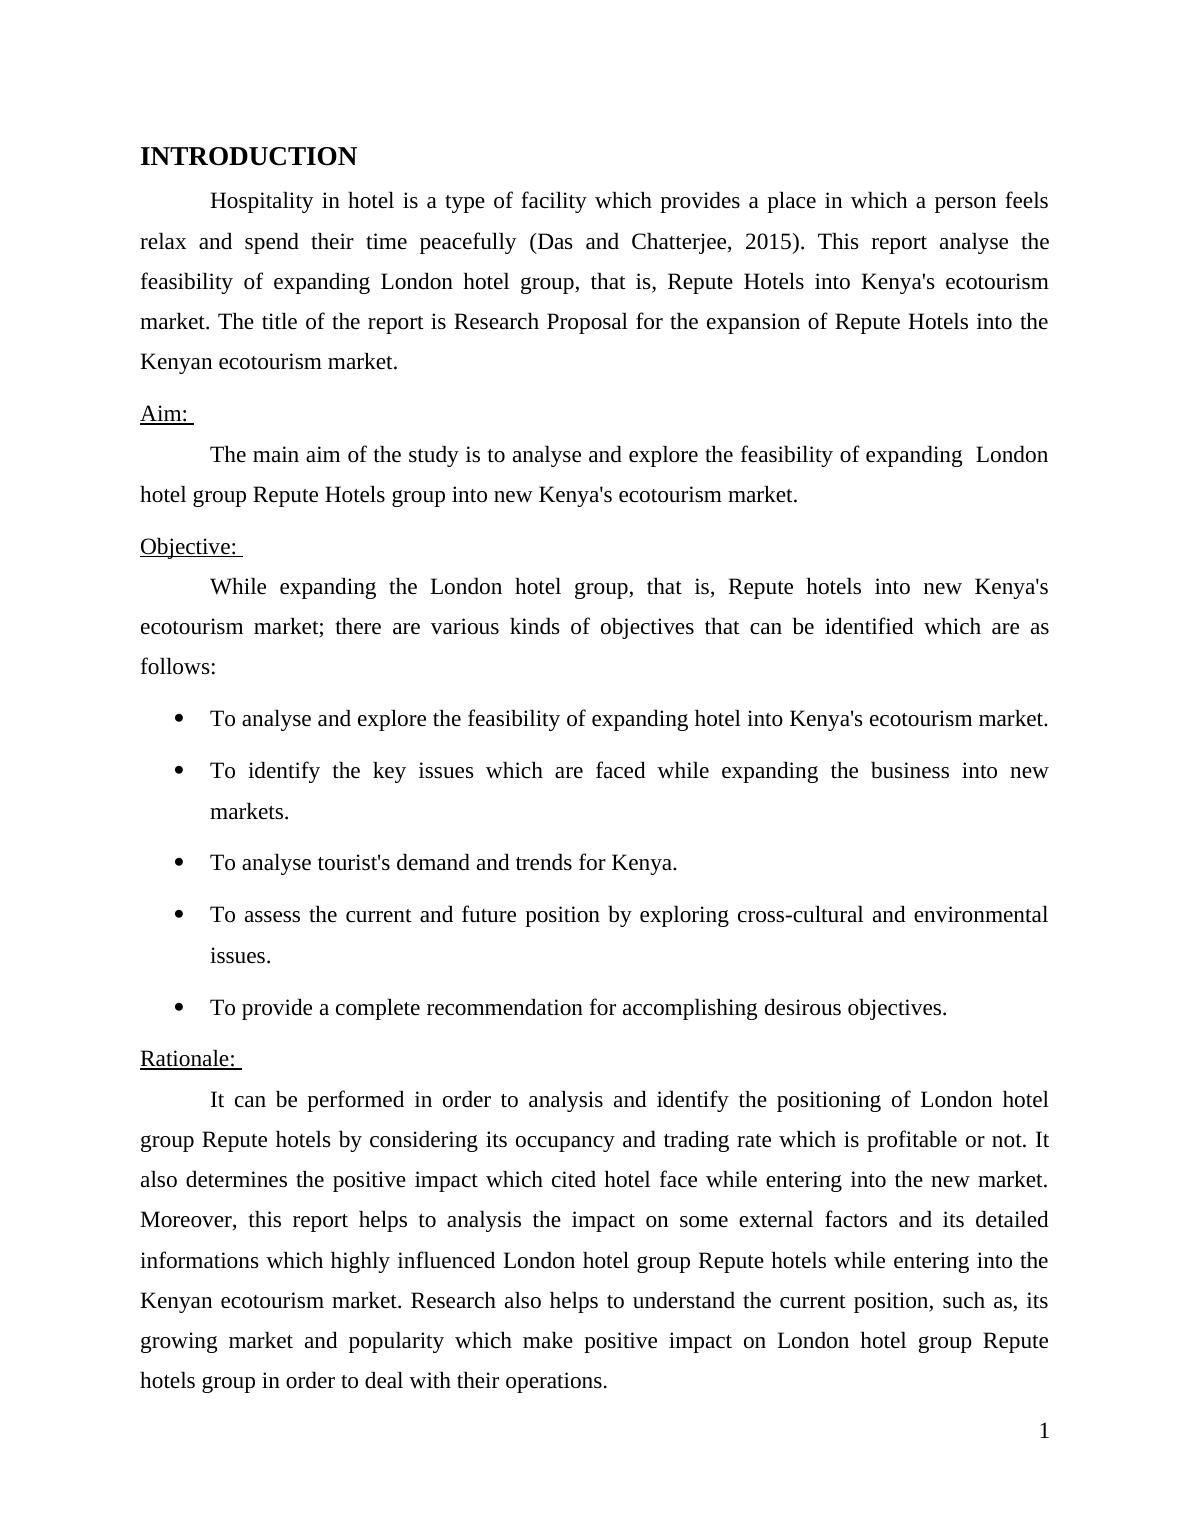 Research Proposal on Hospitality Industry_3